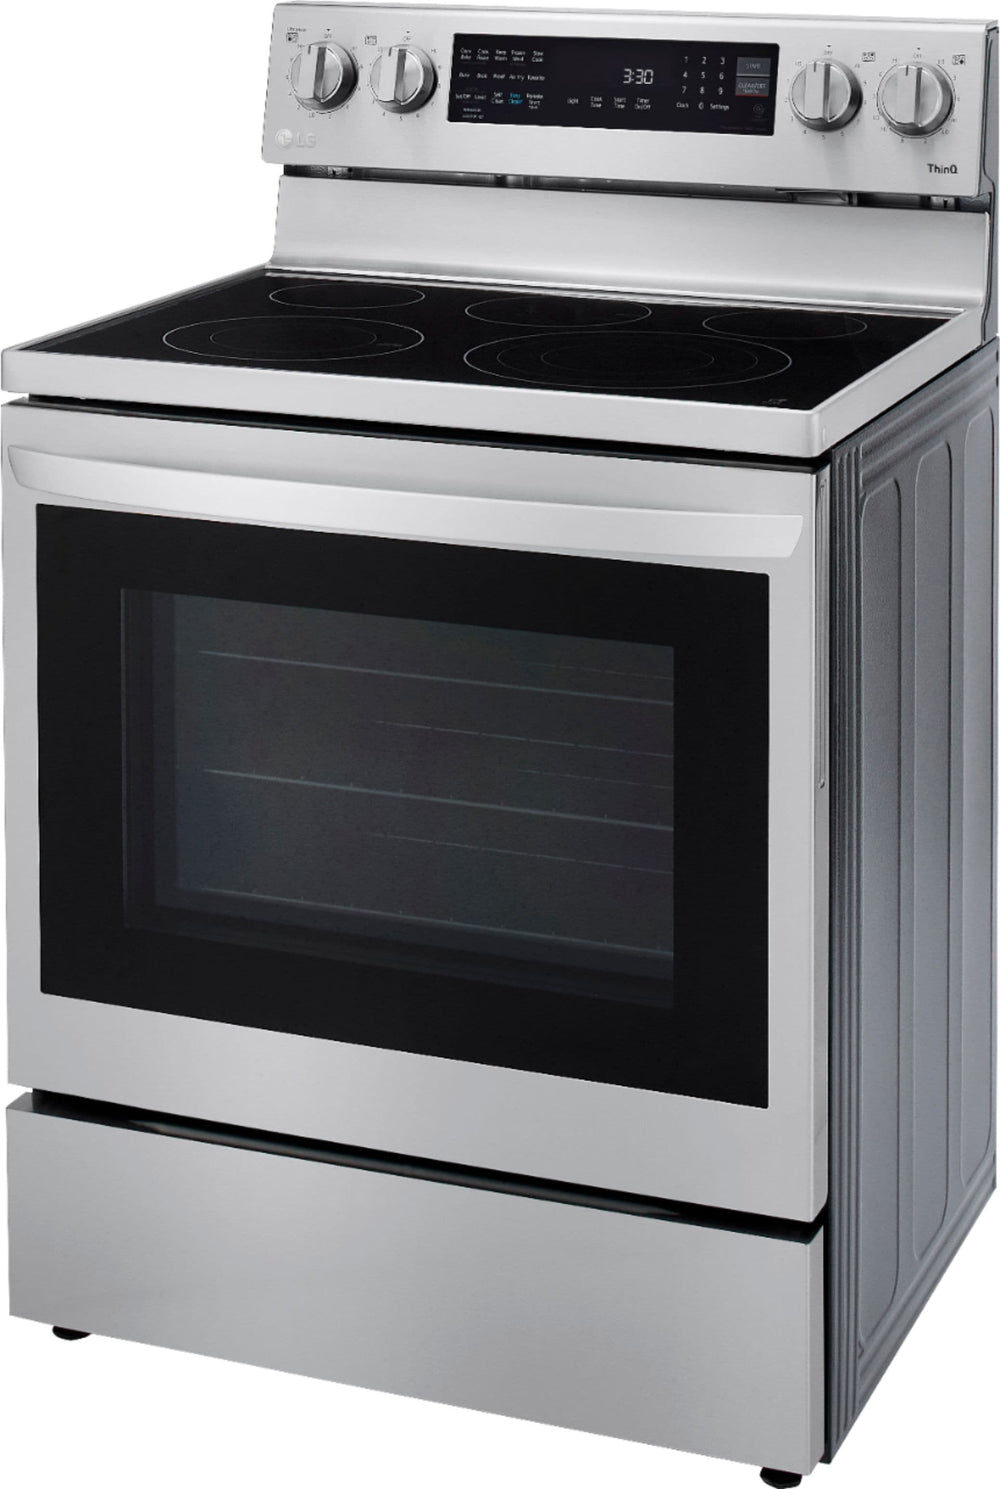 LG - 6.3 Cu. Ft. Smart Freestanding Electric Convection Range with EasyClean, Air Fry and InstaView - Stainless steel_1